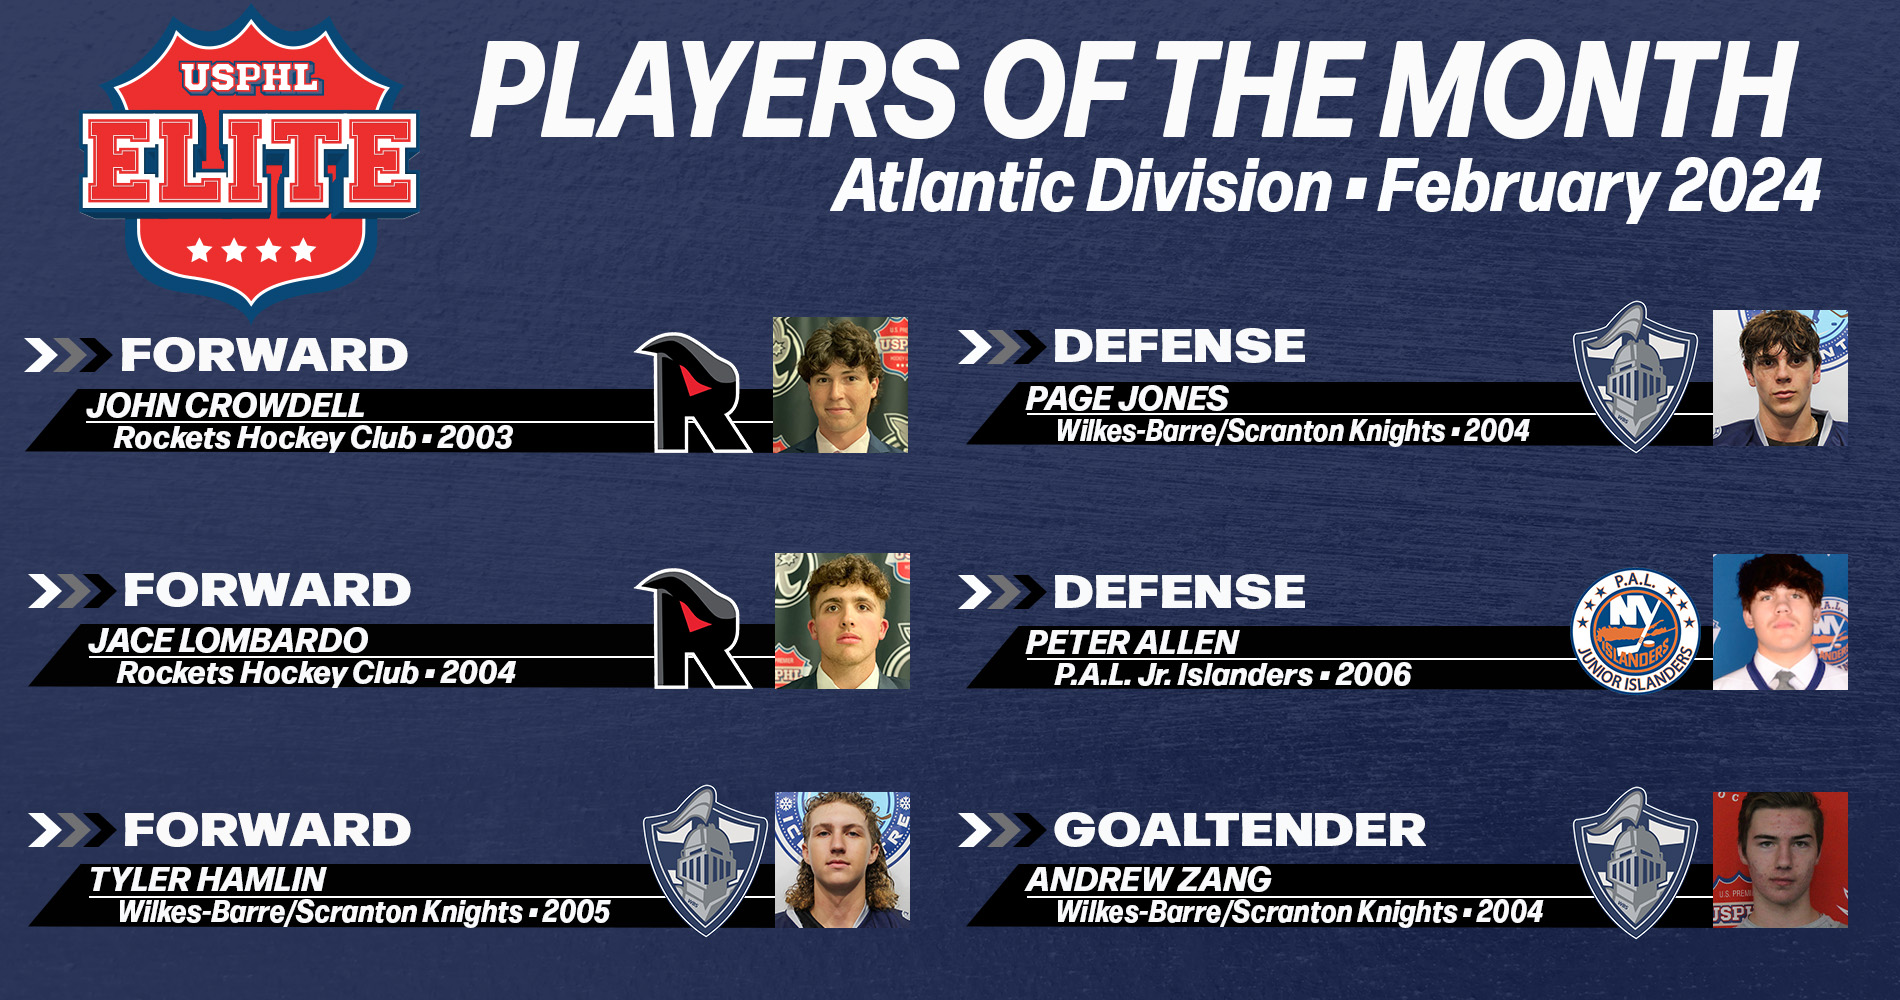 USPHL Elite 2023-24 Atlantic Division Players Of The Month: February 2024